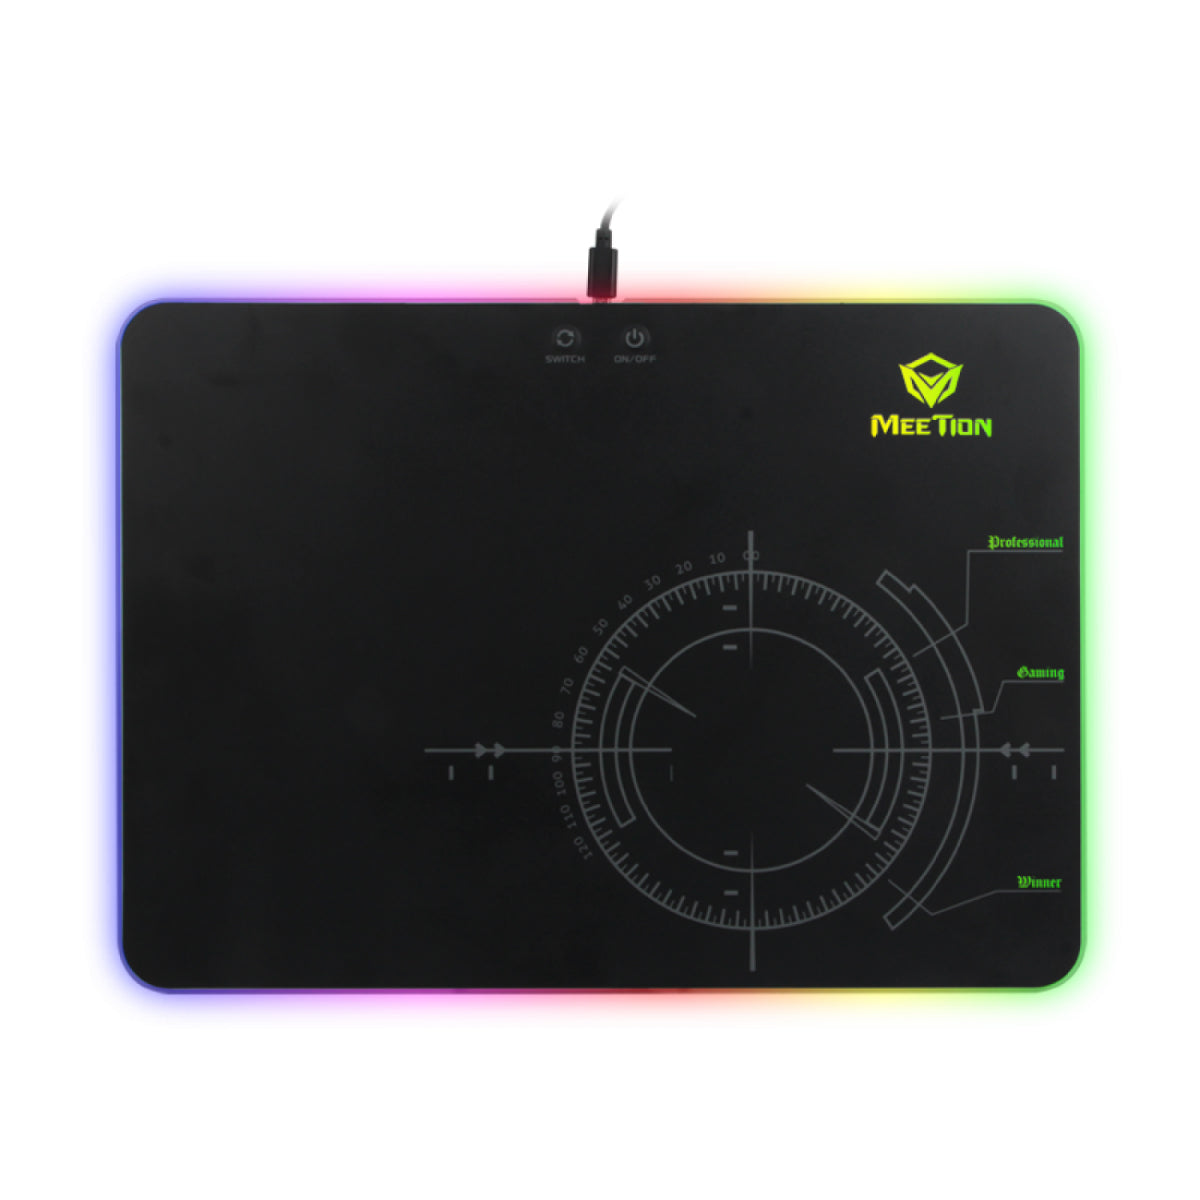 MeeTion Glowing Backlit RGB LED Gaming Mouse Pad